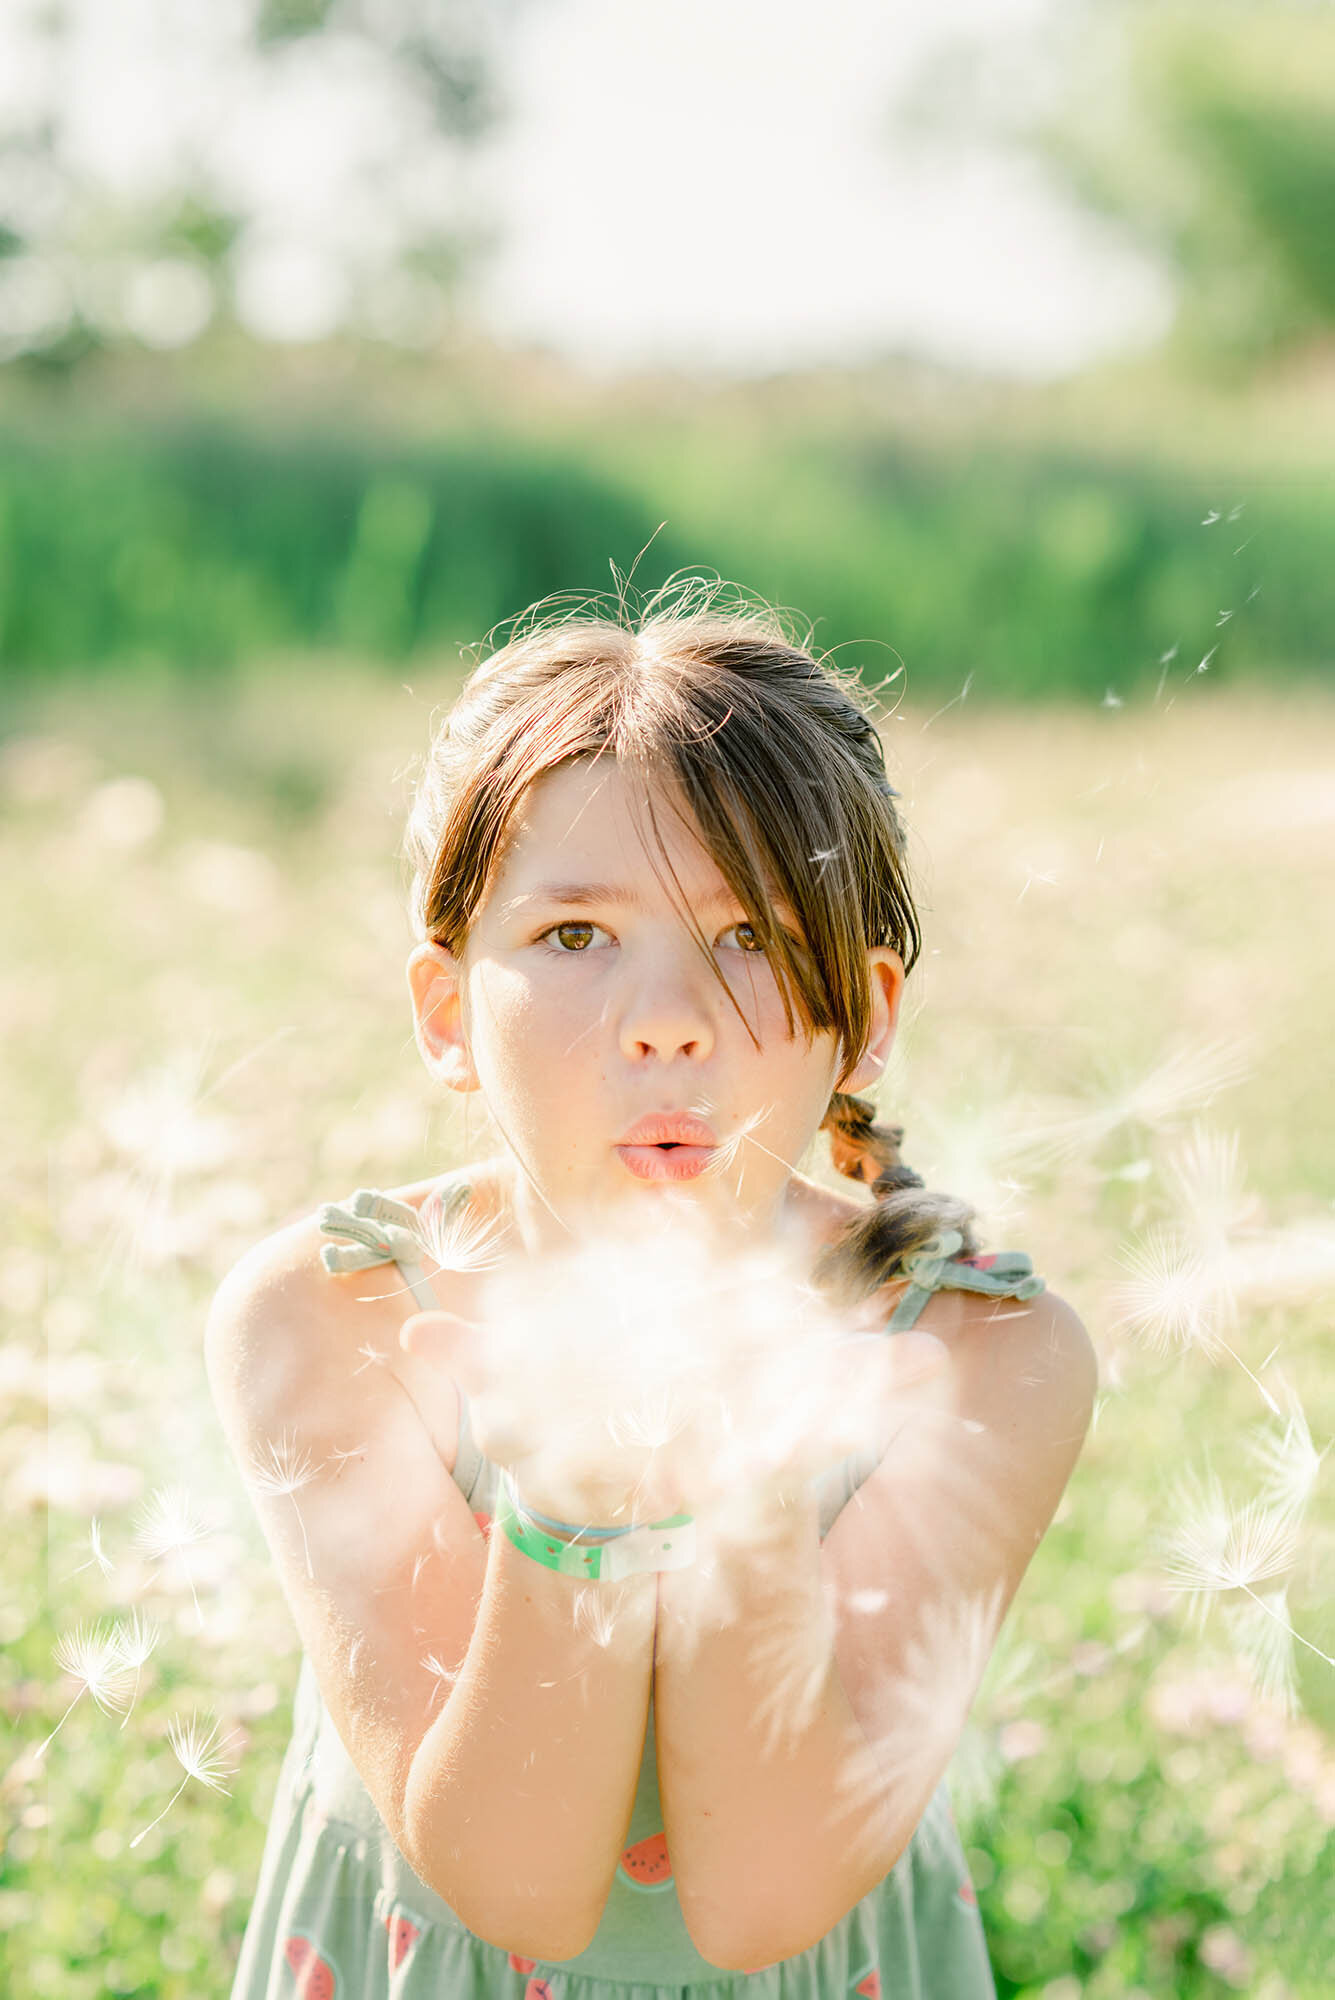 Young girl blowing dandelion seeds